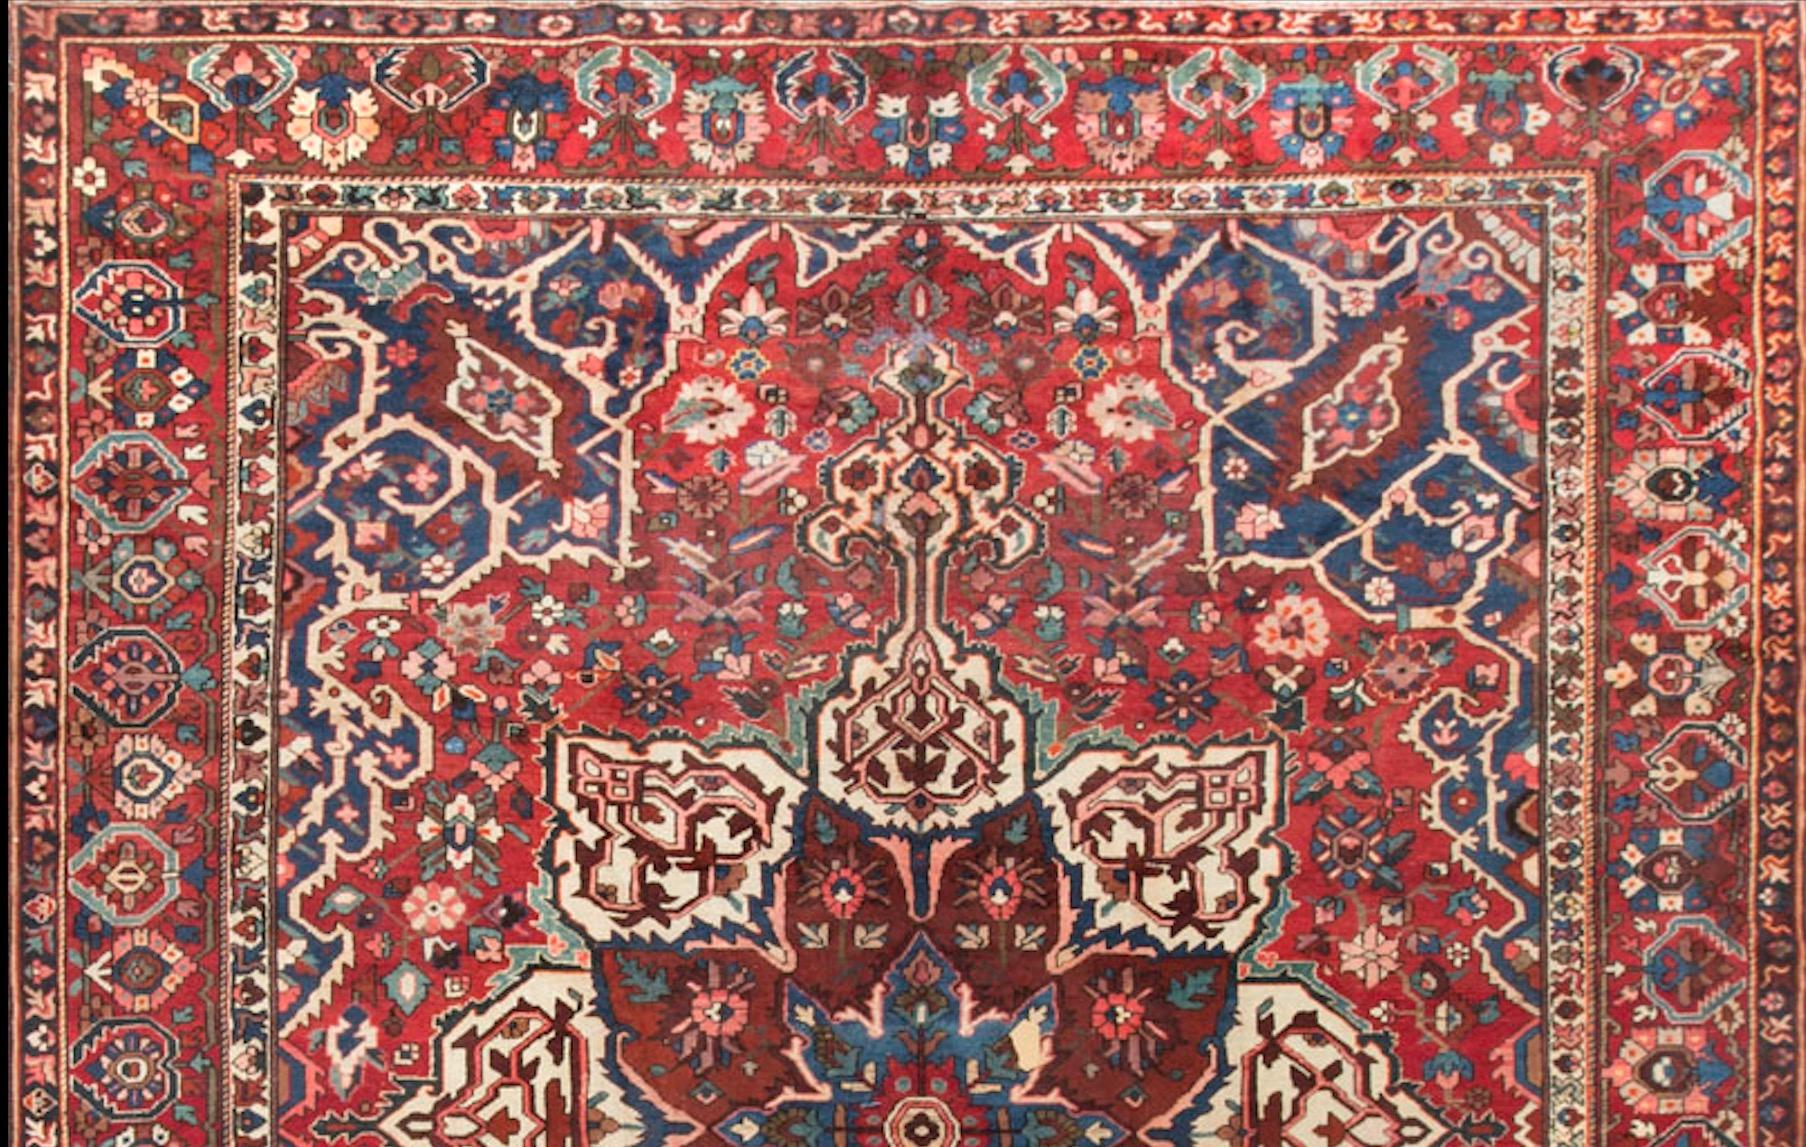 Hand-Woven Antique Persian Fine Bakhtiari Red / Red Rug, circa 1930 11'10 x 14'8 For Sale